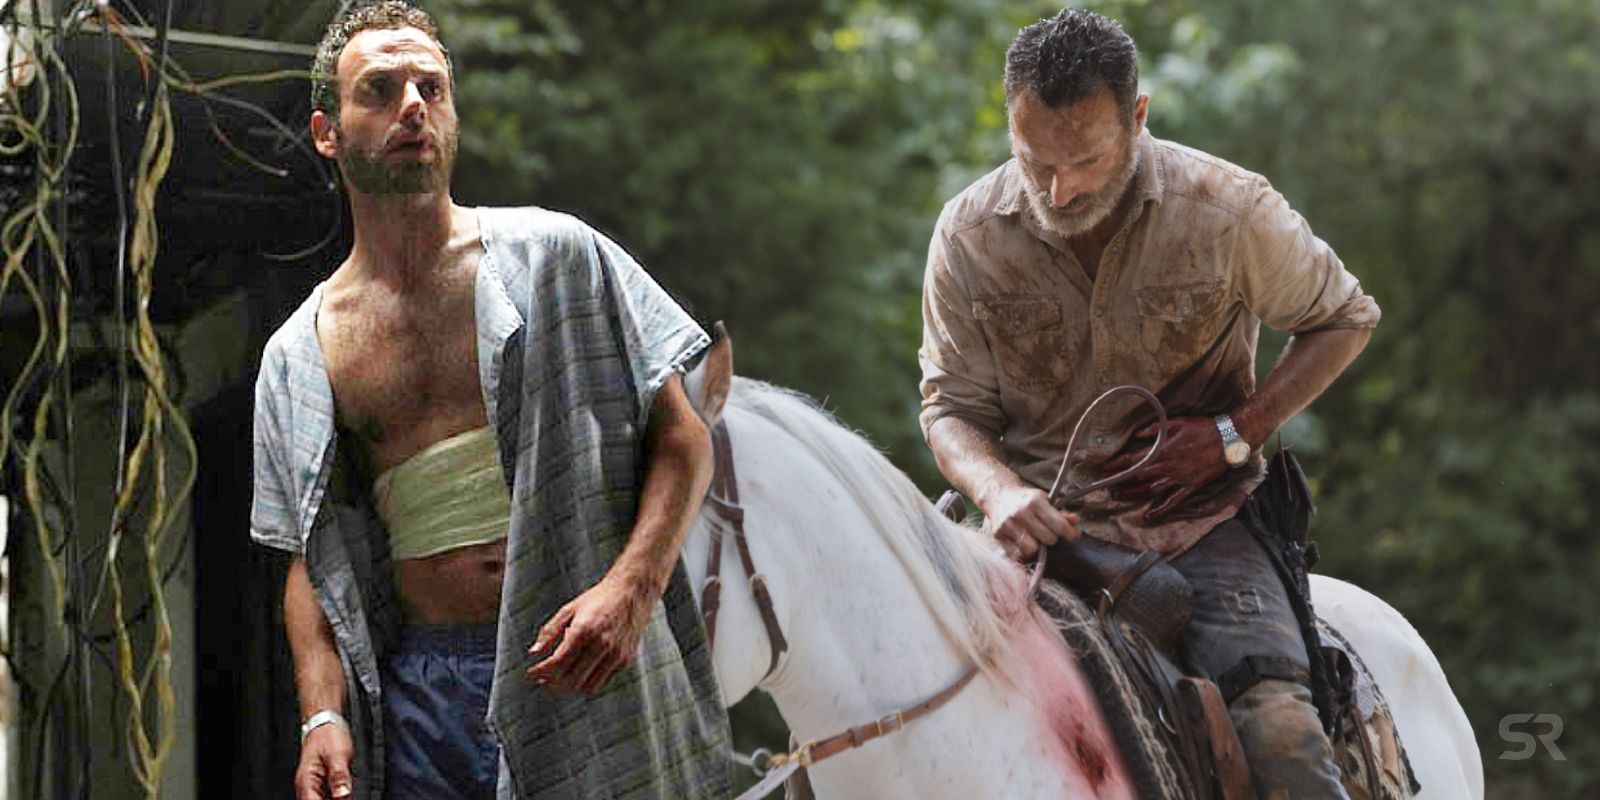 The Walking Dead 5 Moments That Caused Viewers To Nope Out (& 5 That Caused A Ratings Spike)